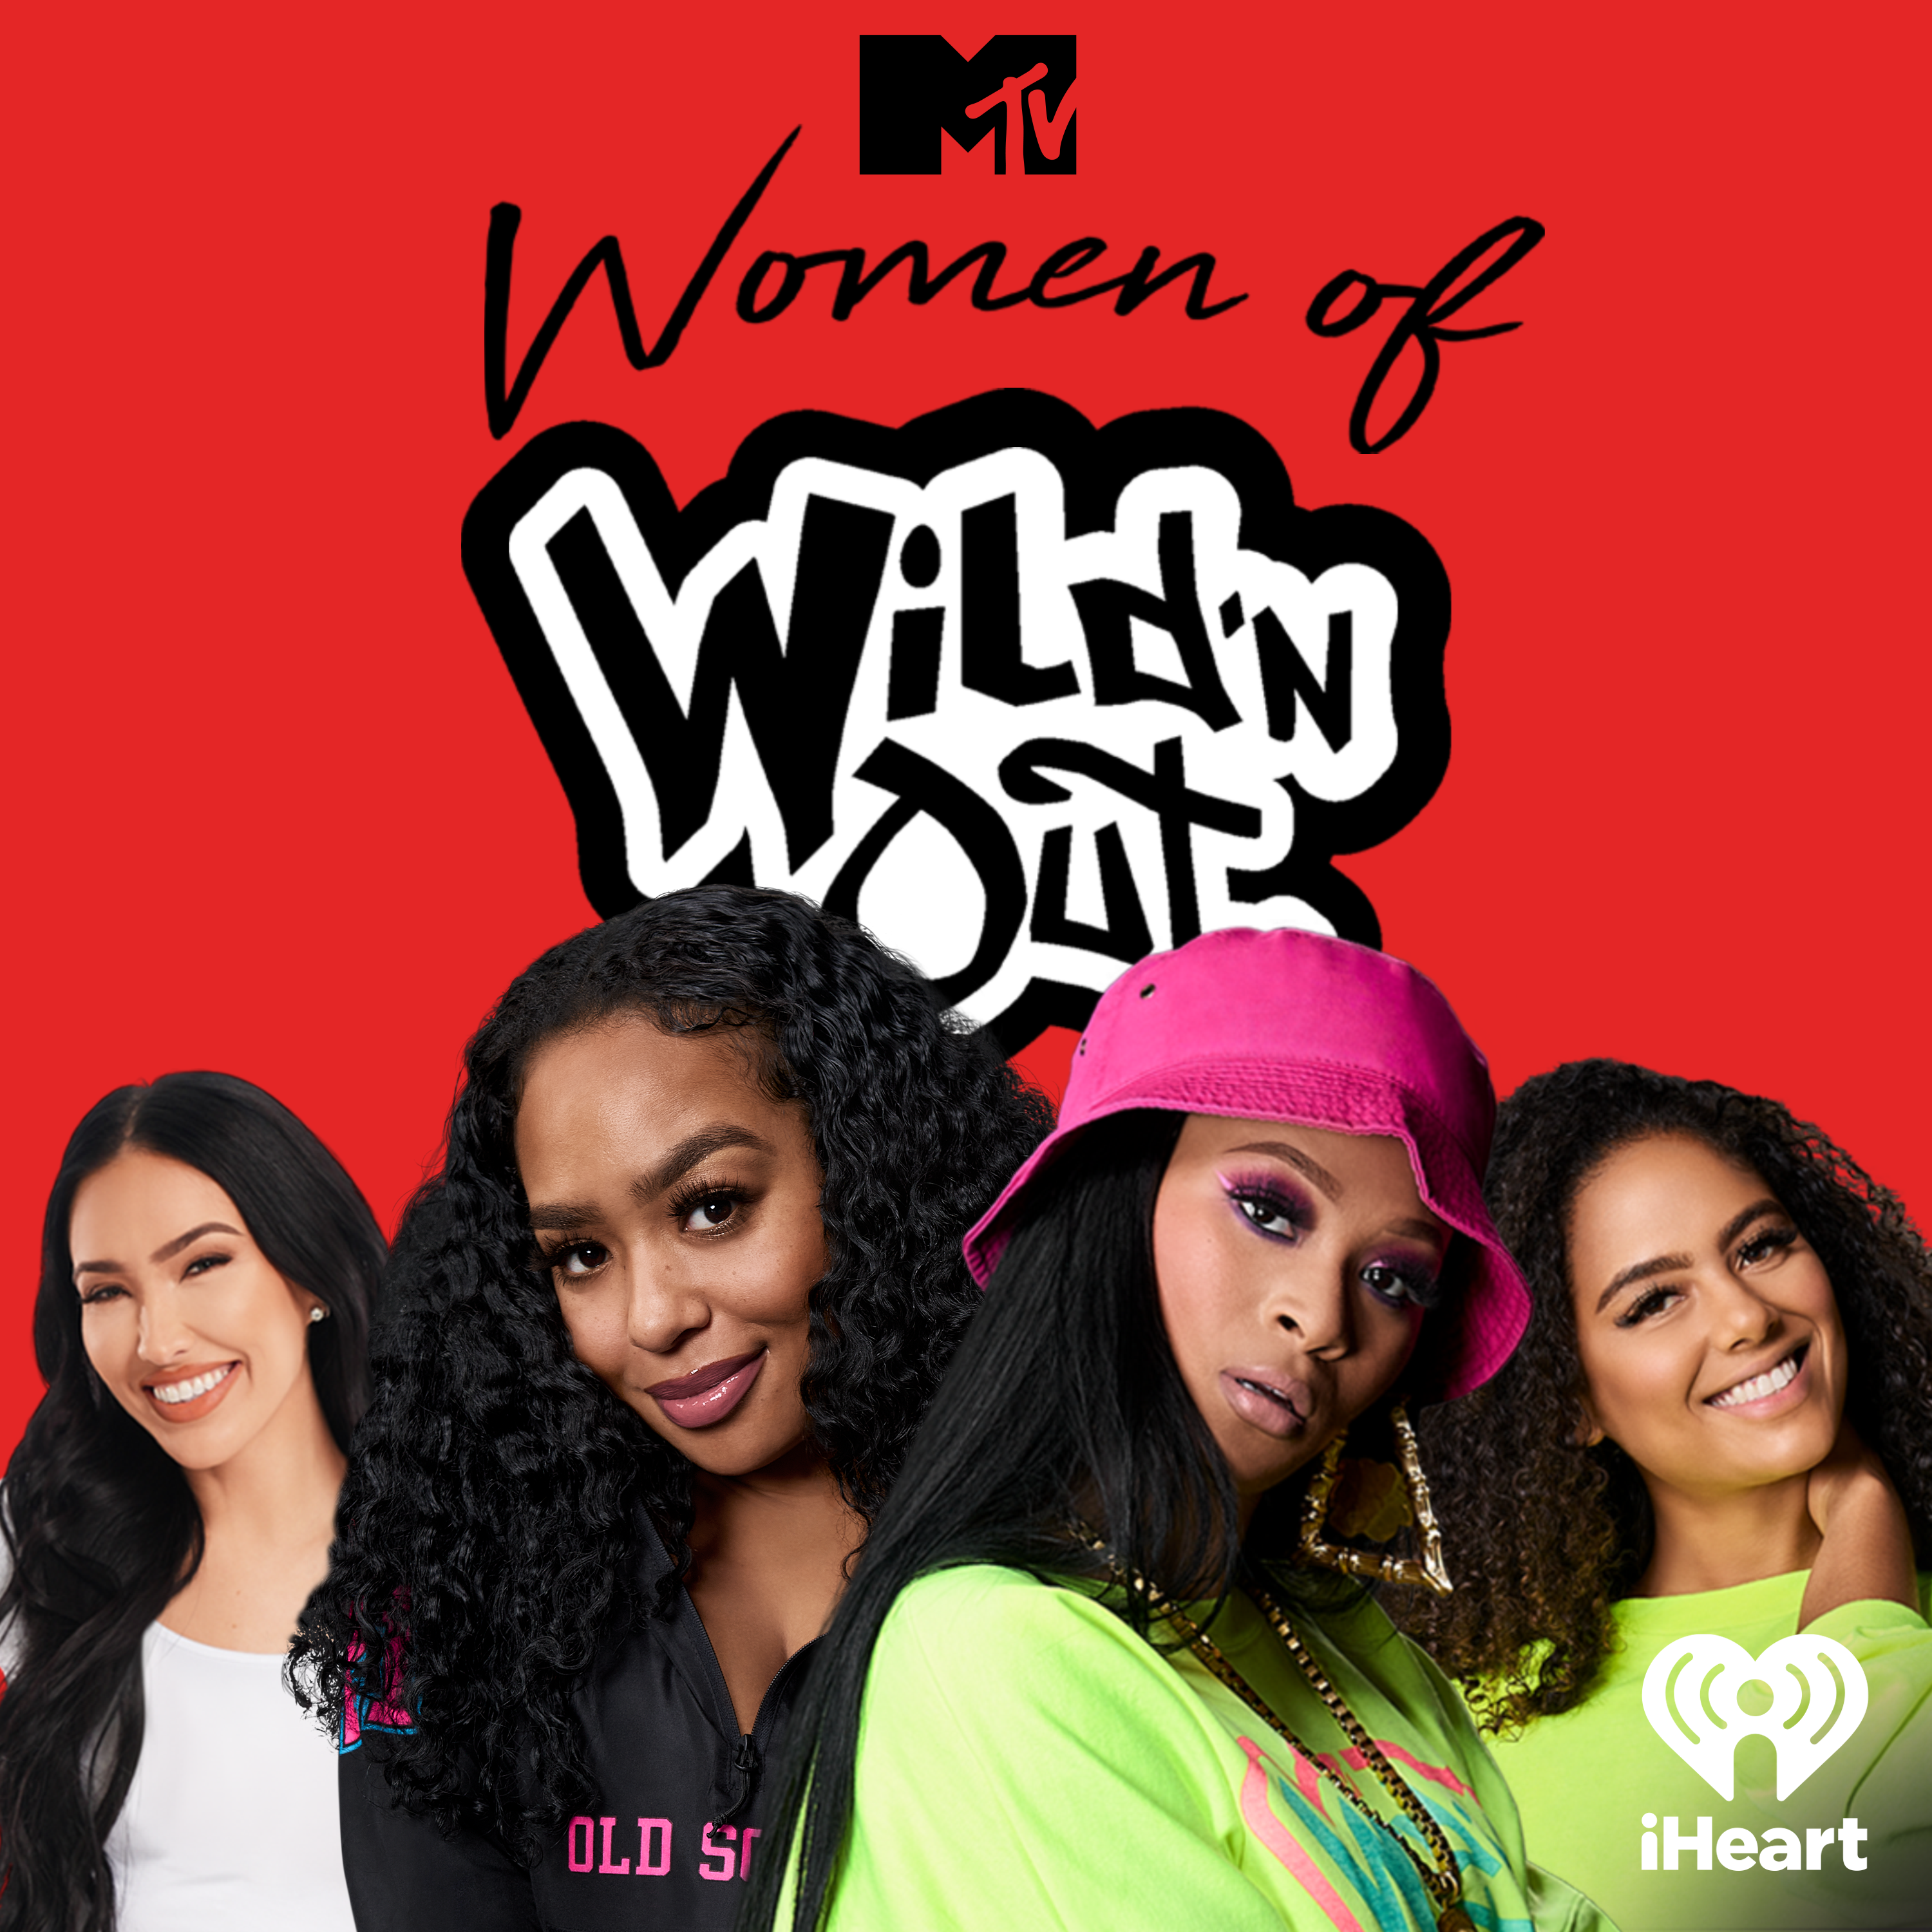 Introducing: MTV's Women of Wild 'N Out